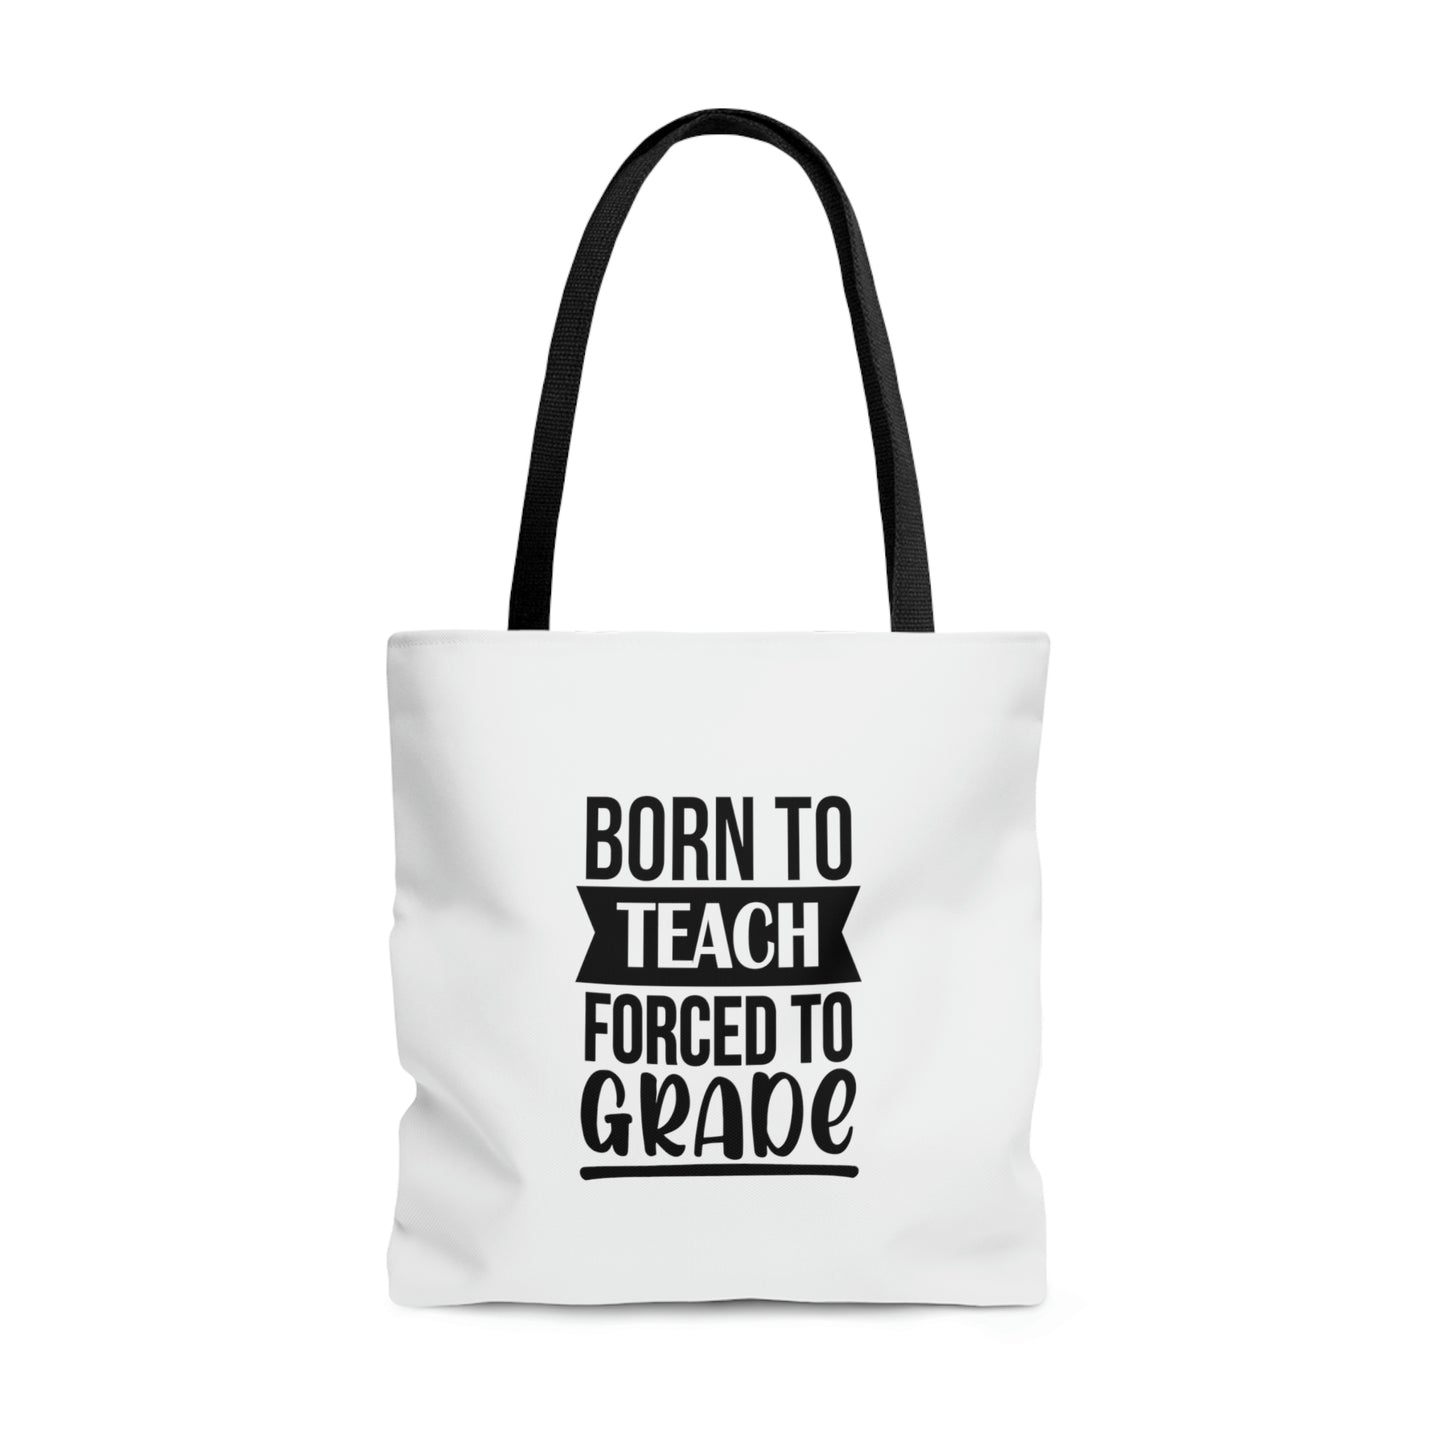 "Born to teach, forced to grade" Tote Bag !